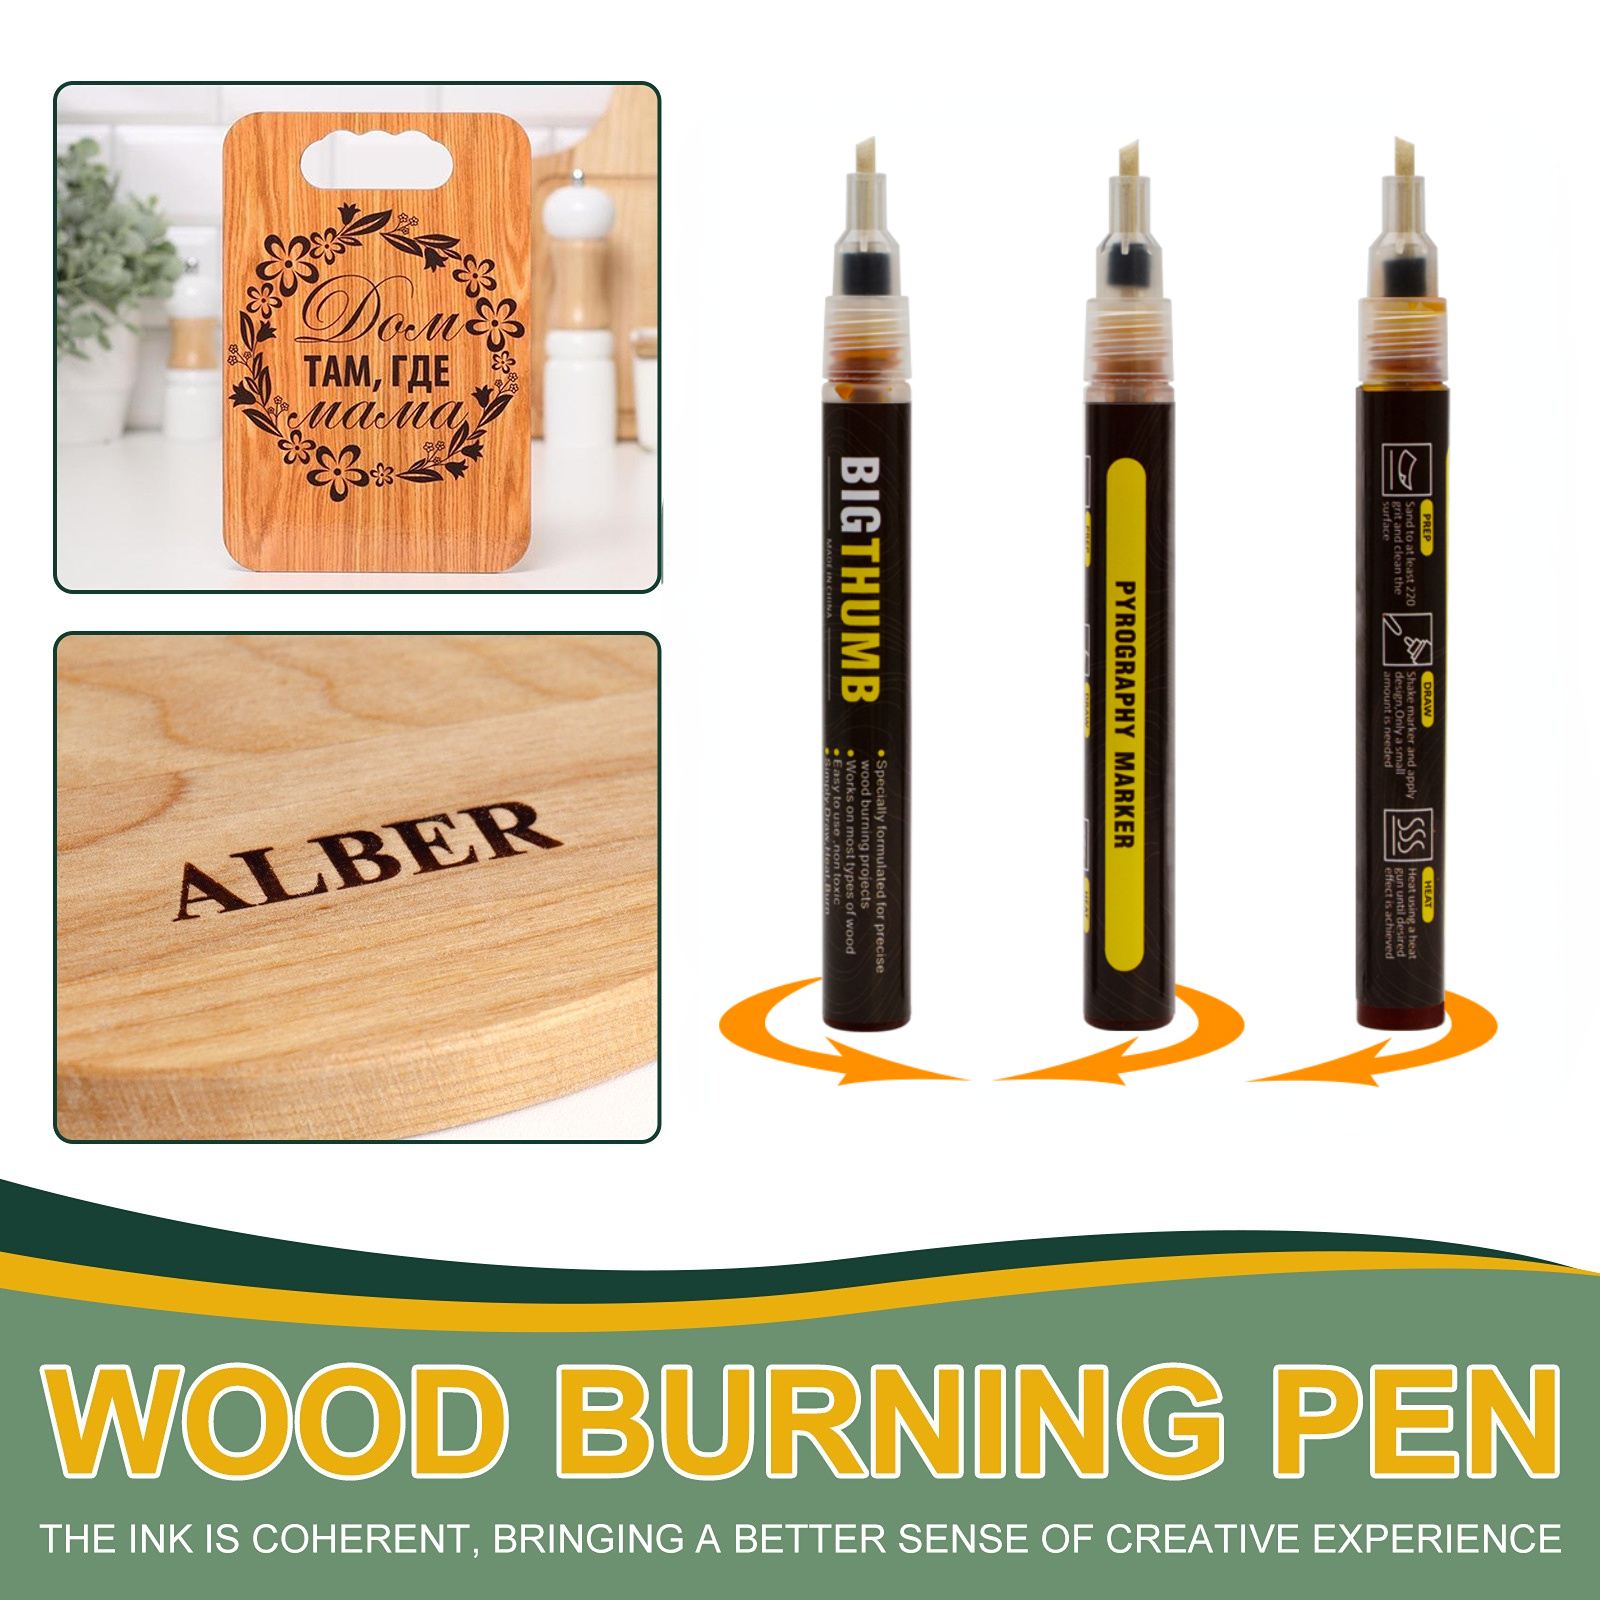 Flyesea Dual Tip Scorch Marker Non Toxic Chemical Wood - Temu